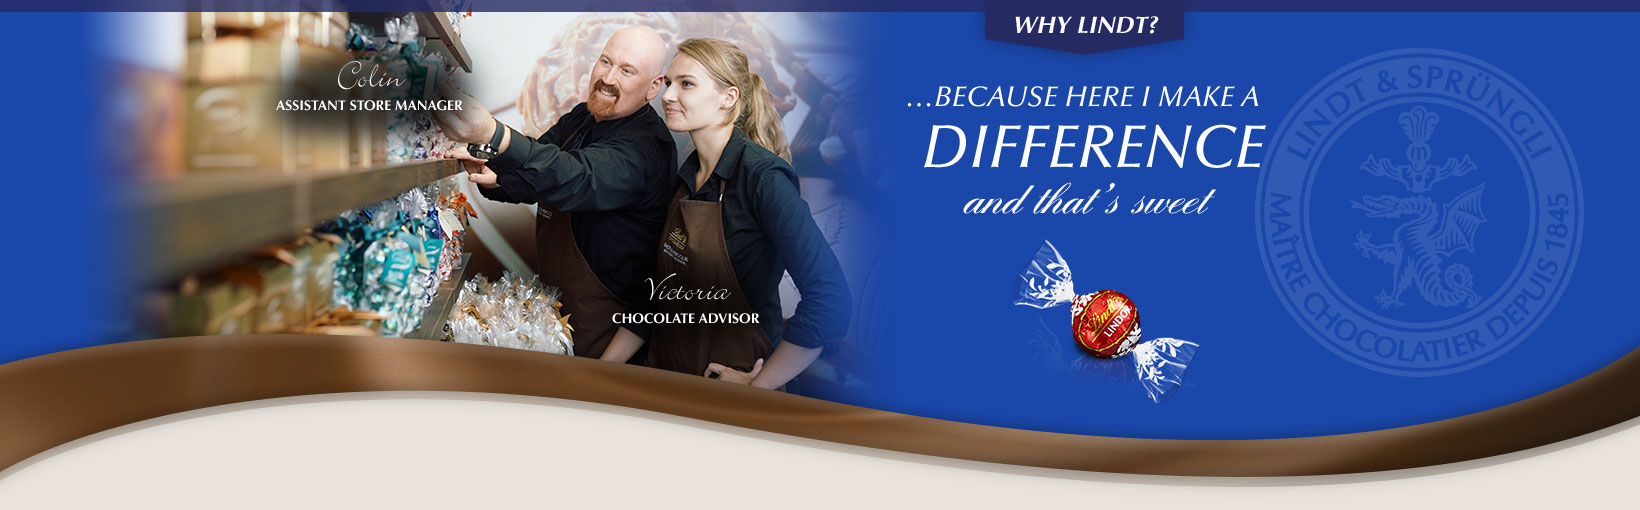 Why Lindt? …Because here I make a difference and that’s sweet. Colin, Assistant Store Manager and Victoria, Chocolate Advisor